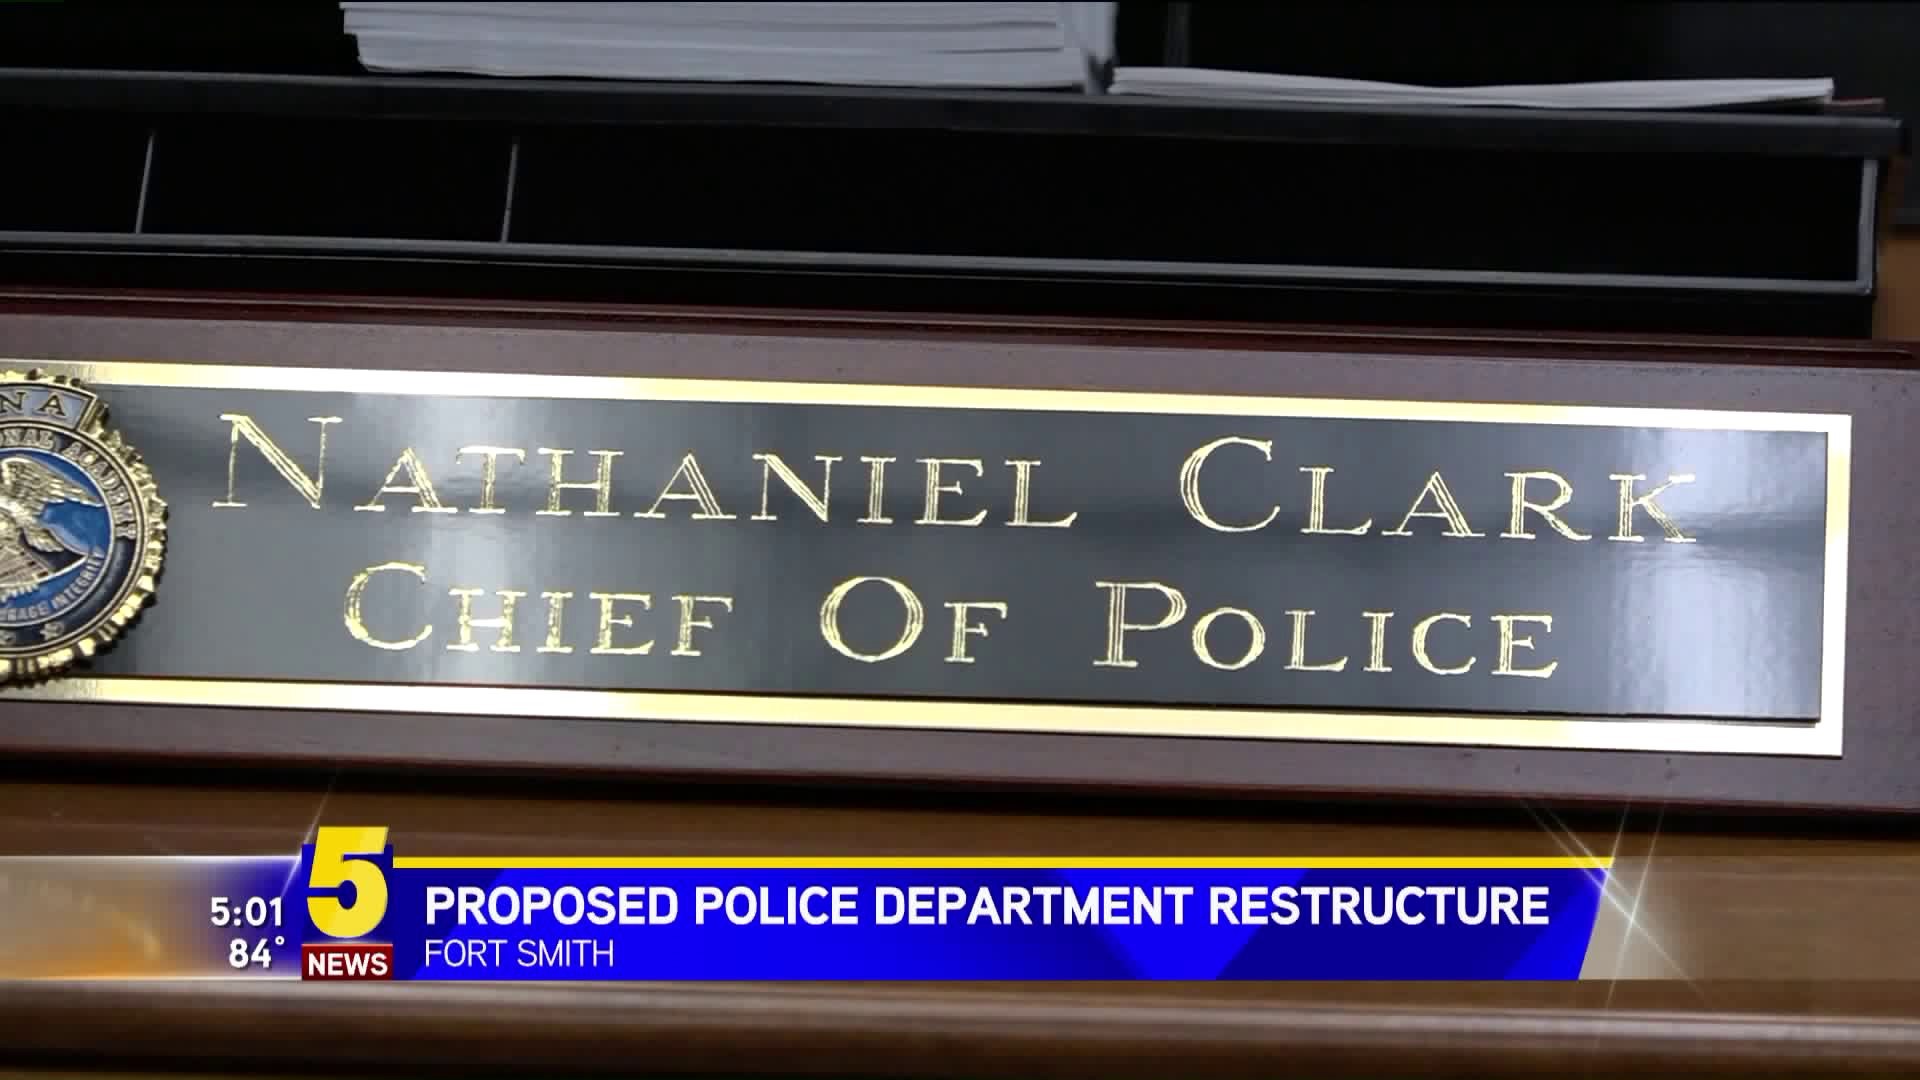 Fort Smith Police Department Proposed Restructure